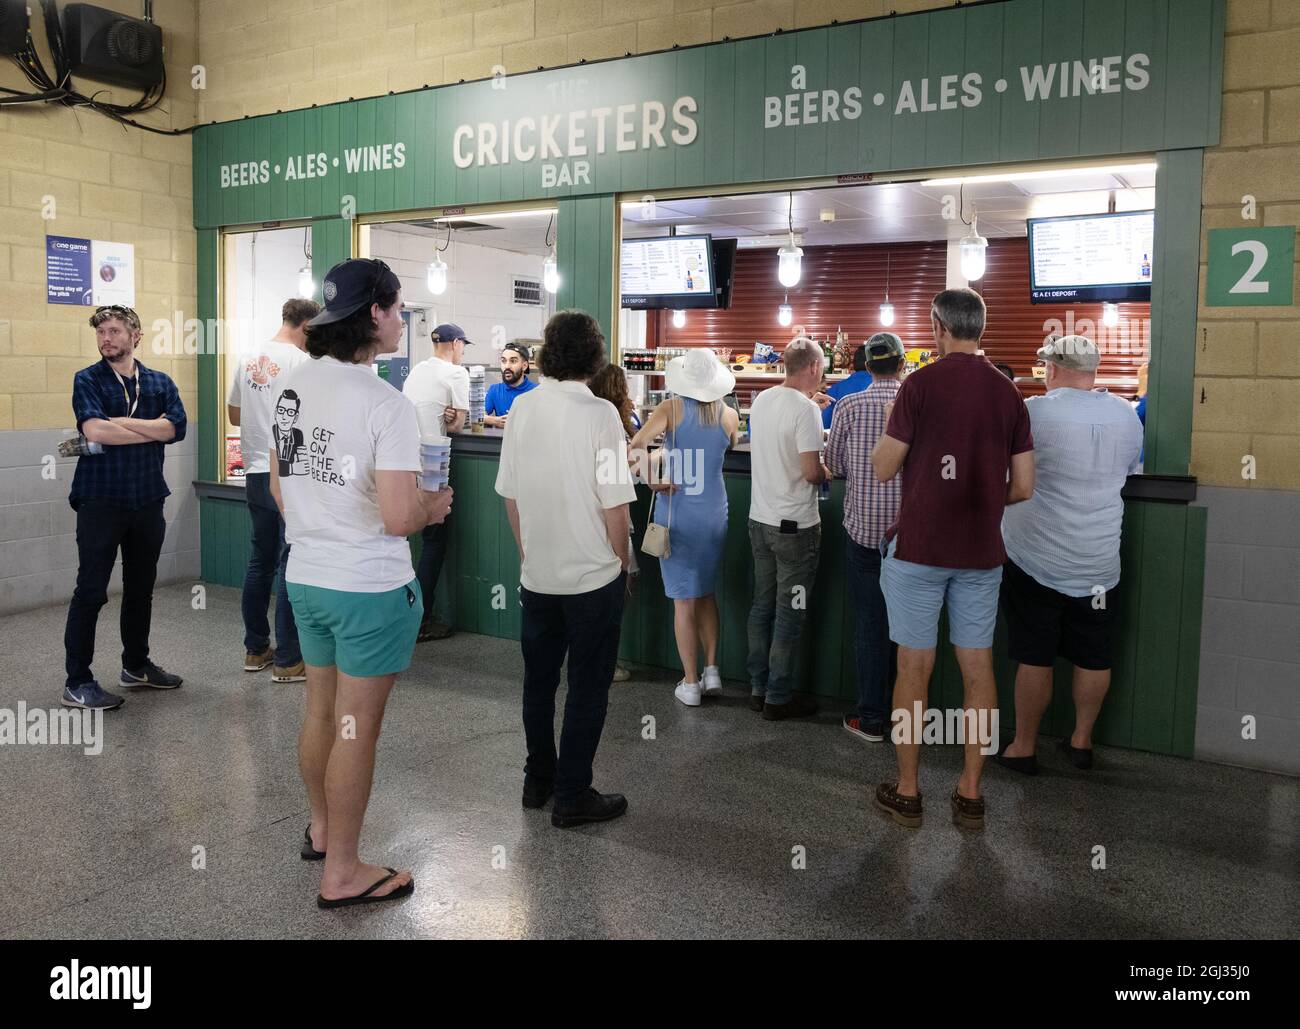 People queuing for drinks at the Cricketers Bar during a cricket match, the Oval cricket ground, Kennington London UK Stock Photo